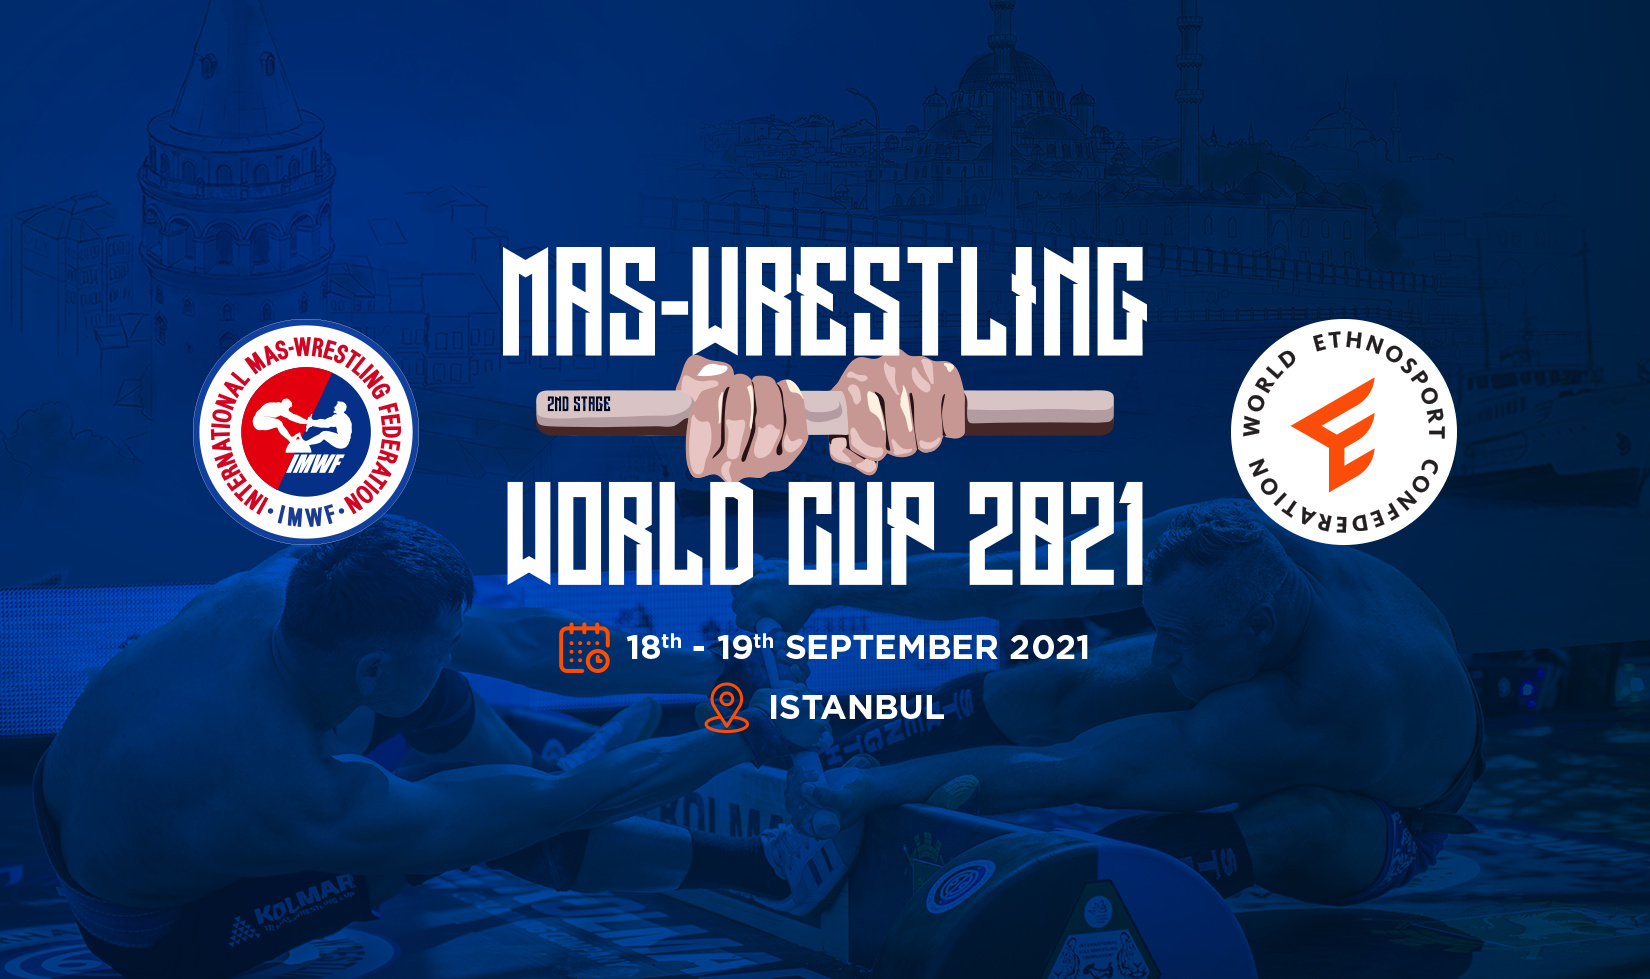 The Countdown’s Started for the Mas-Wrestling World Cup